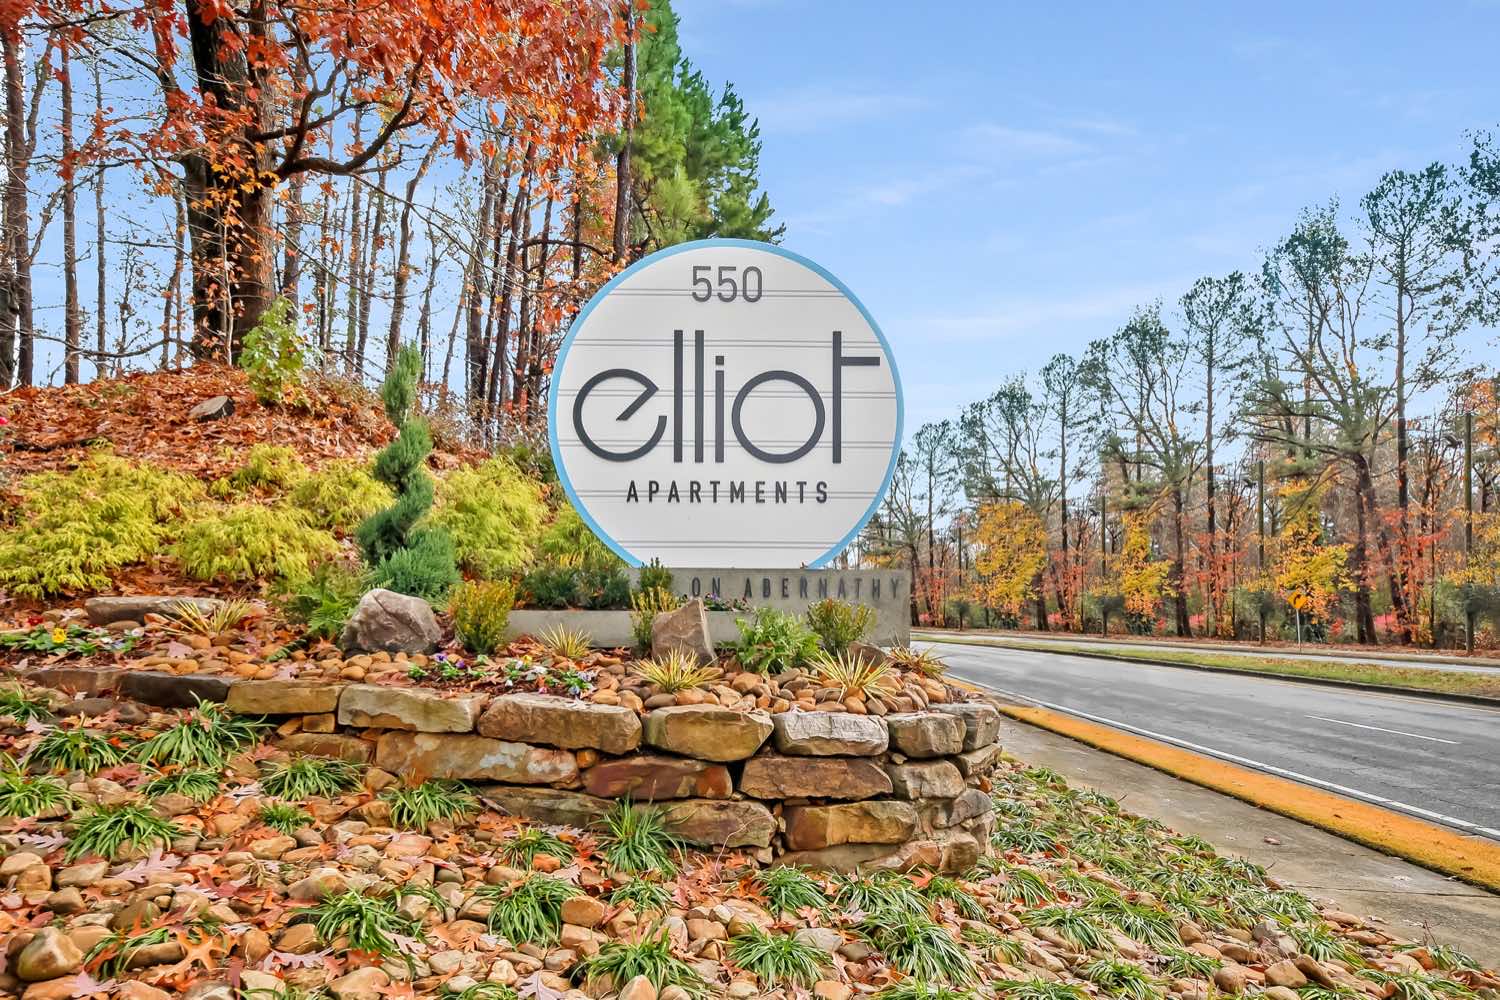 Exterior view of elliot apartments signage and colorful leaves on trees